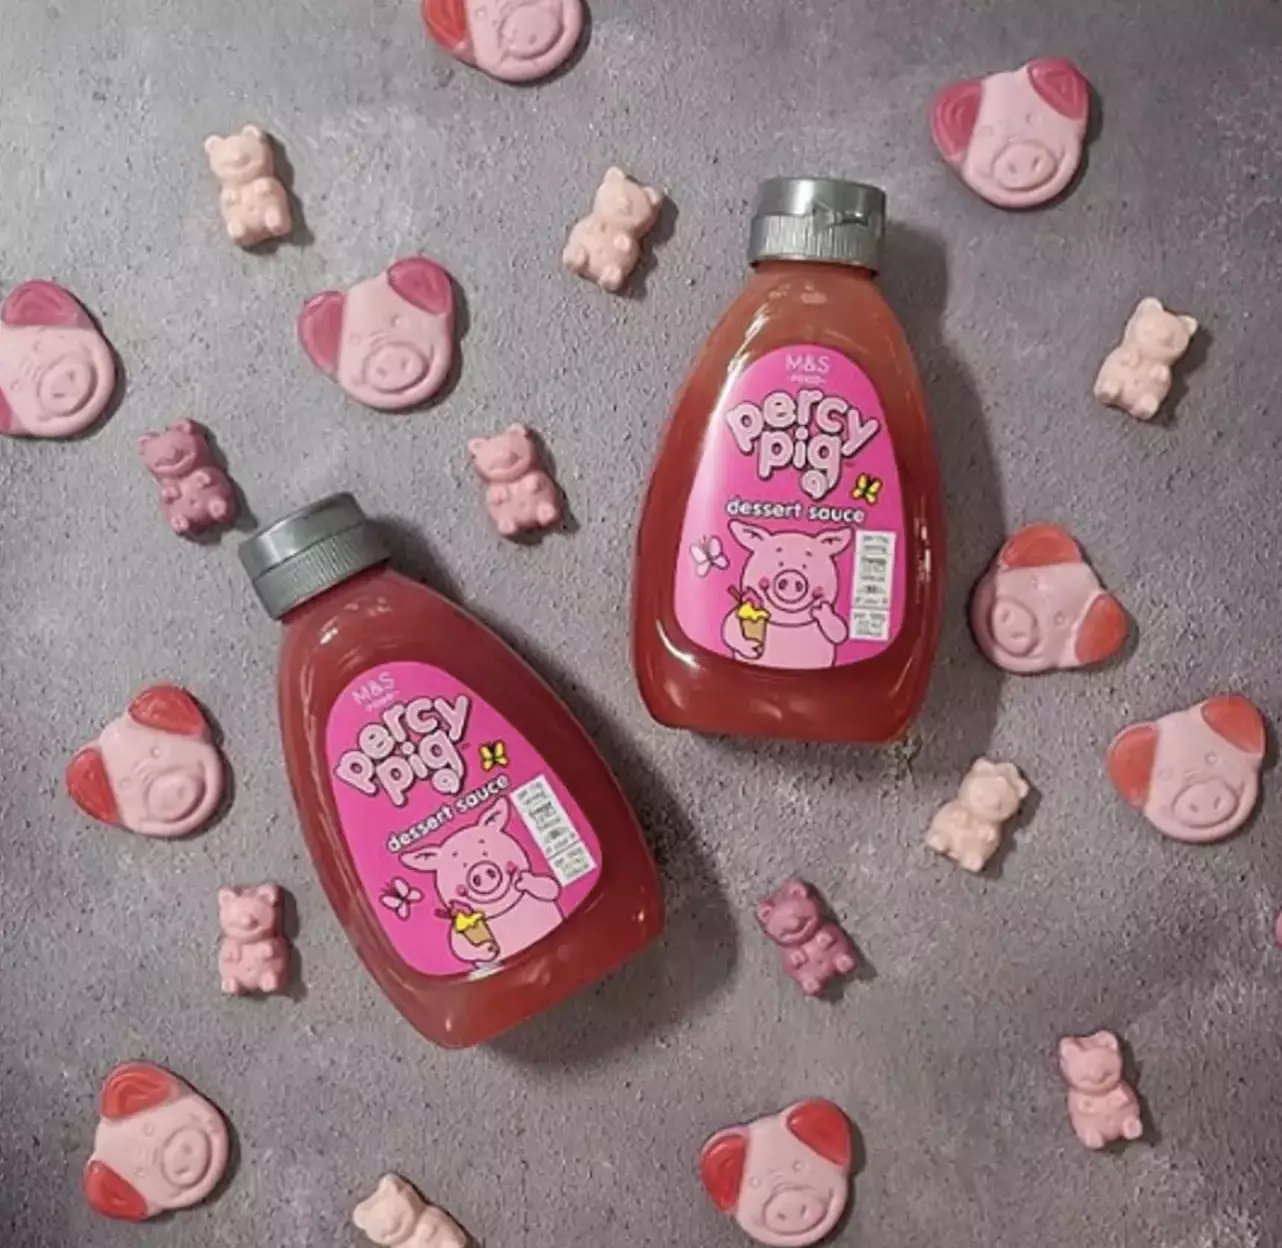 The Percy Pig sauce was also recently launched at £2 per bottle (